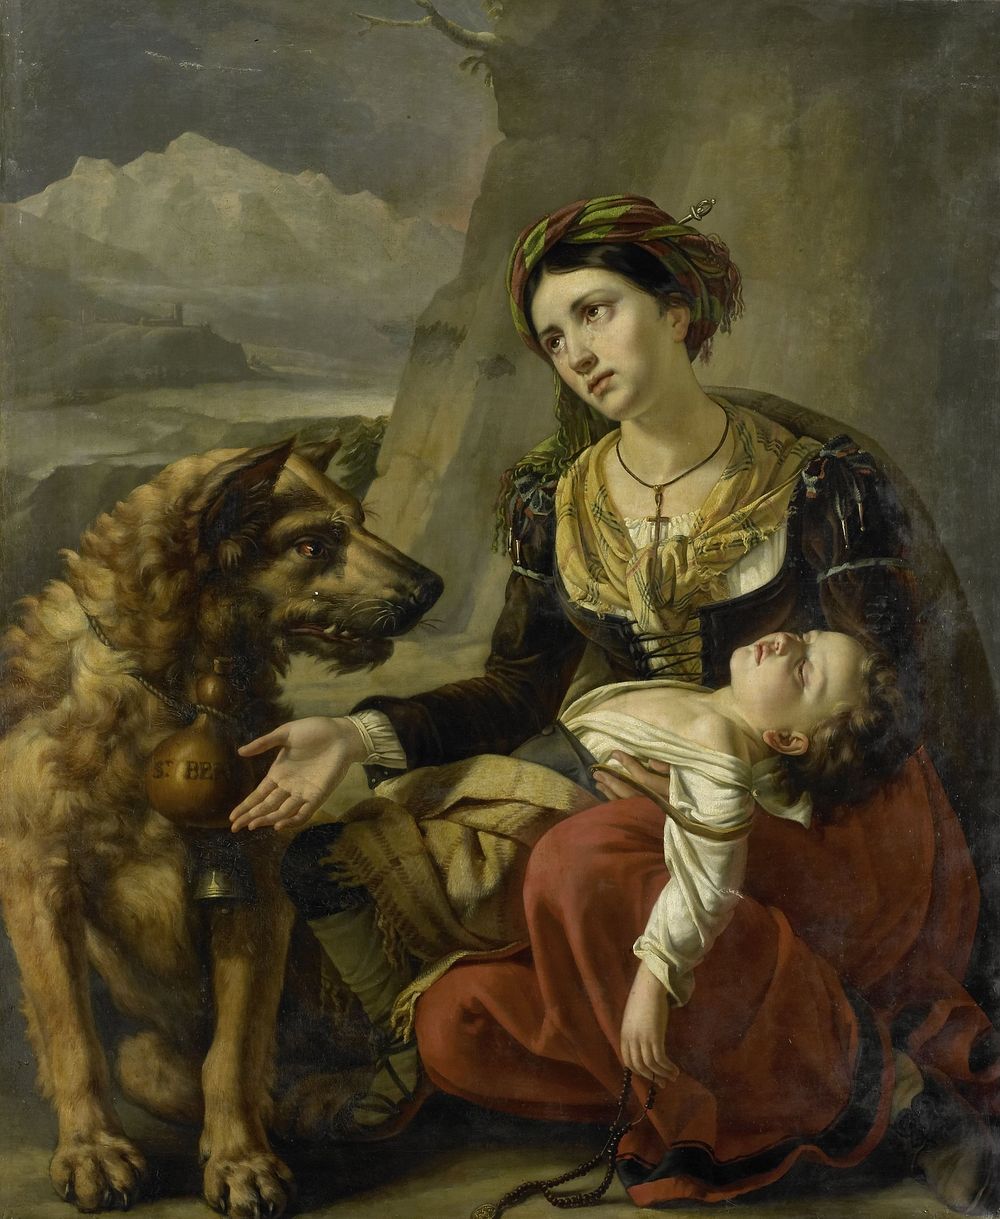 A Saint Bernard Dog Comes to the Aid of a lost Woman with a sick Child (1827) by Charles Picqué